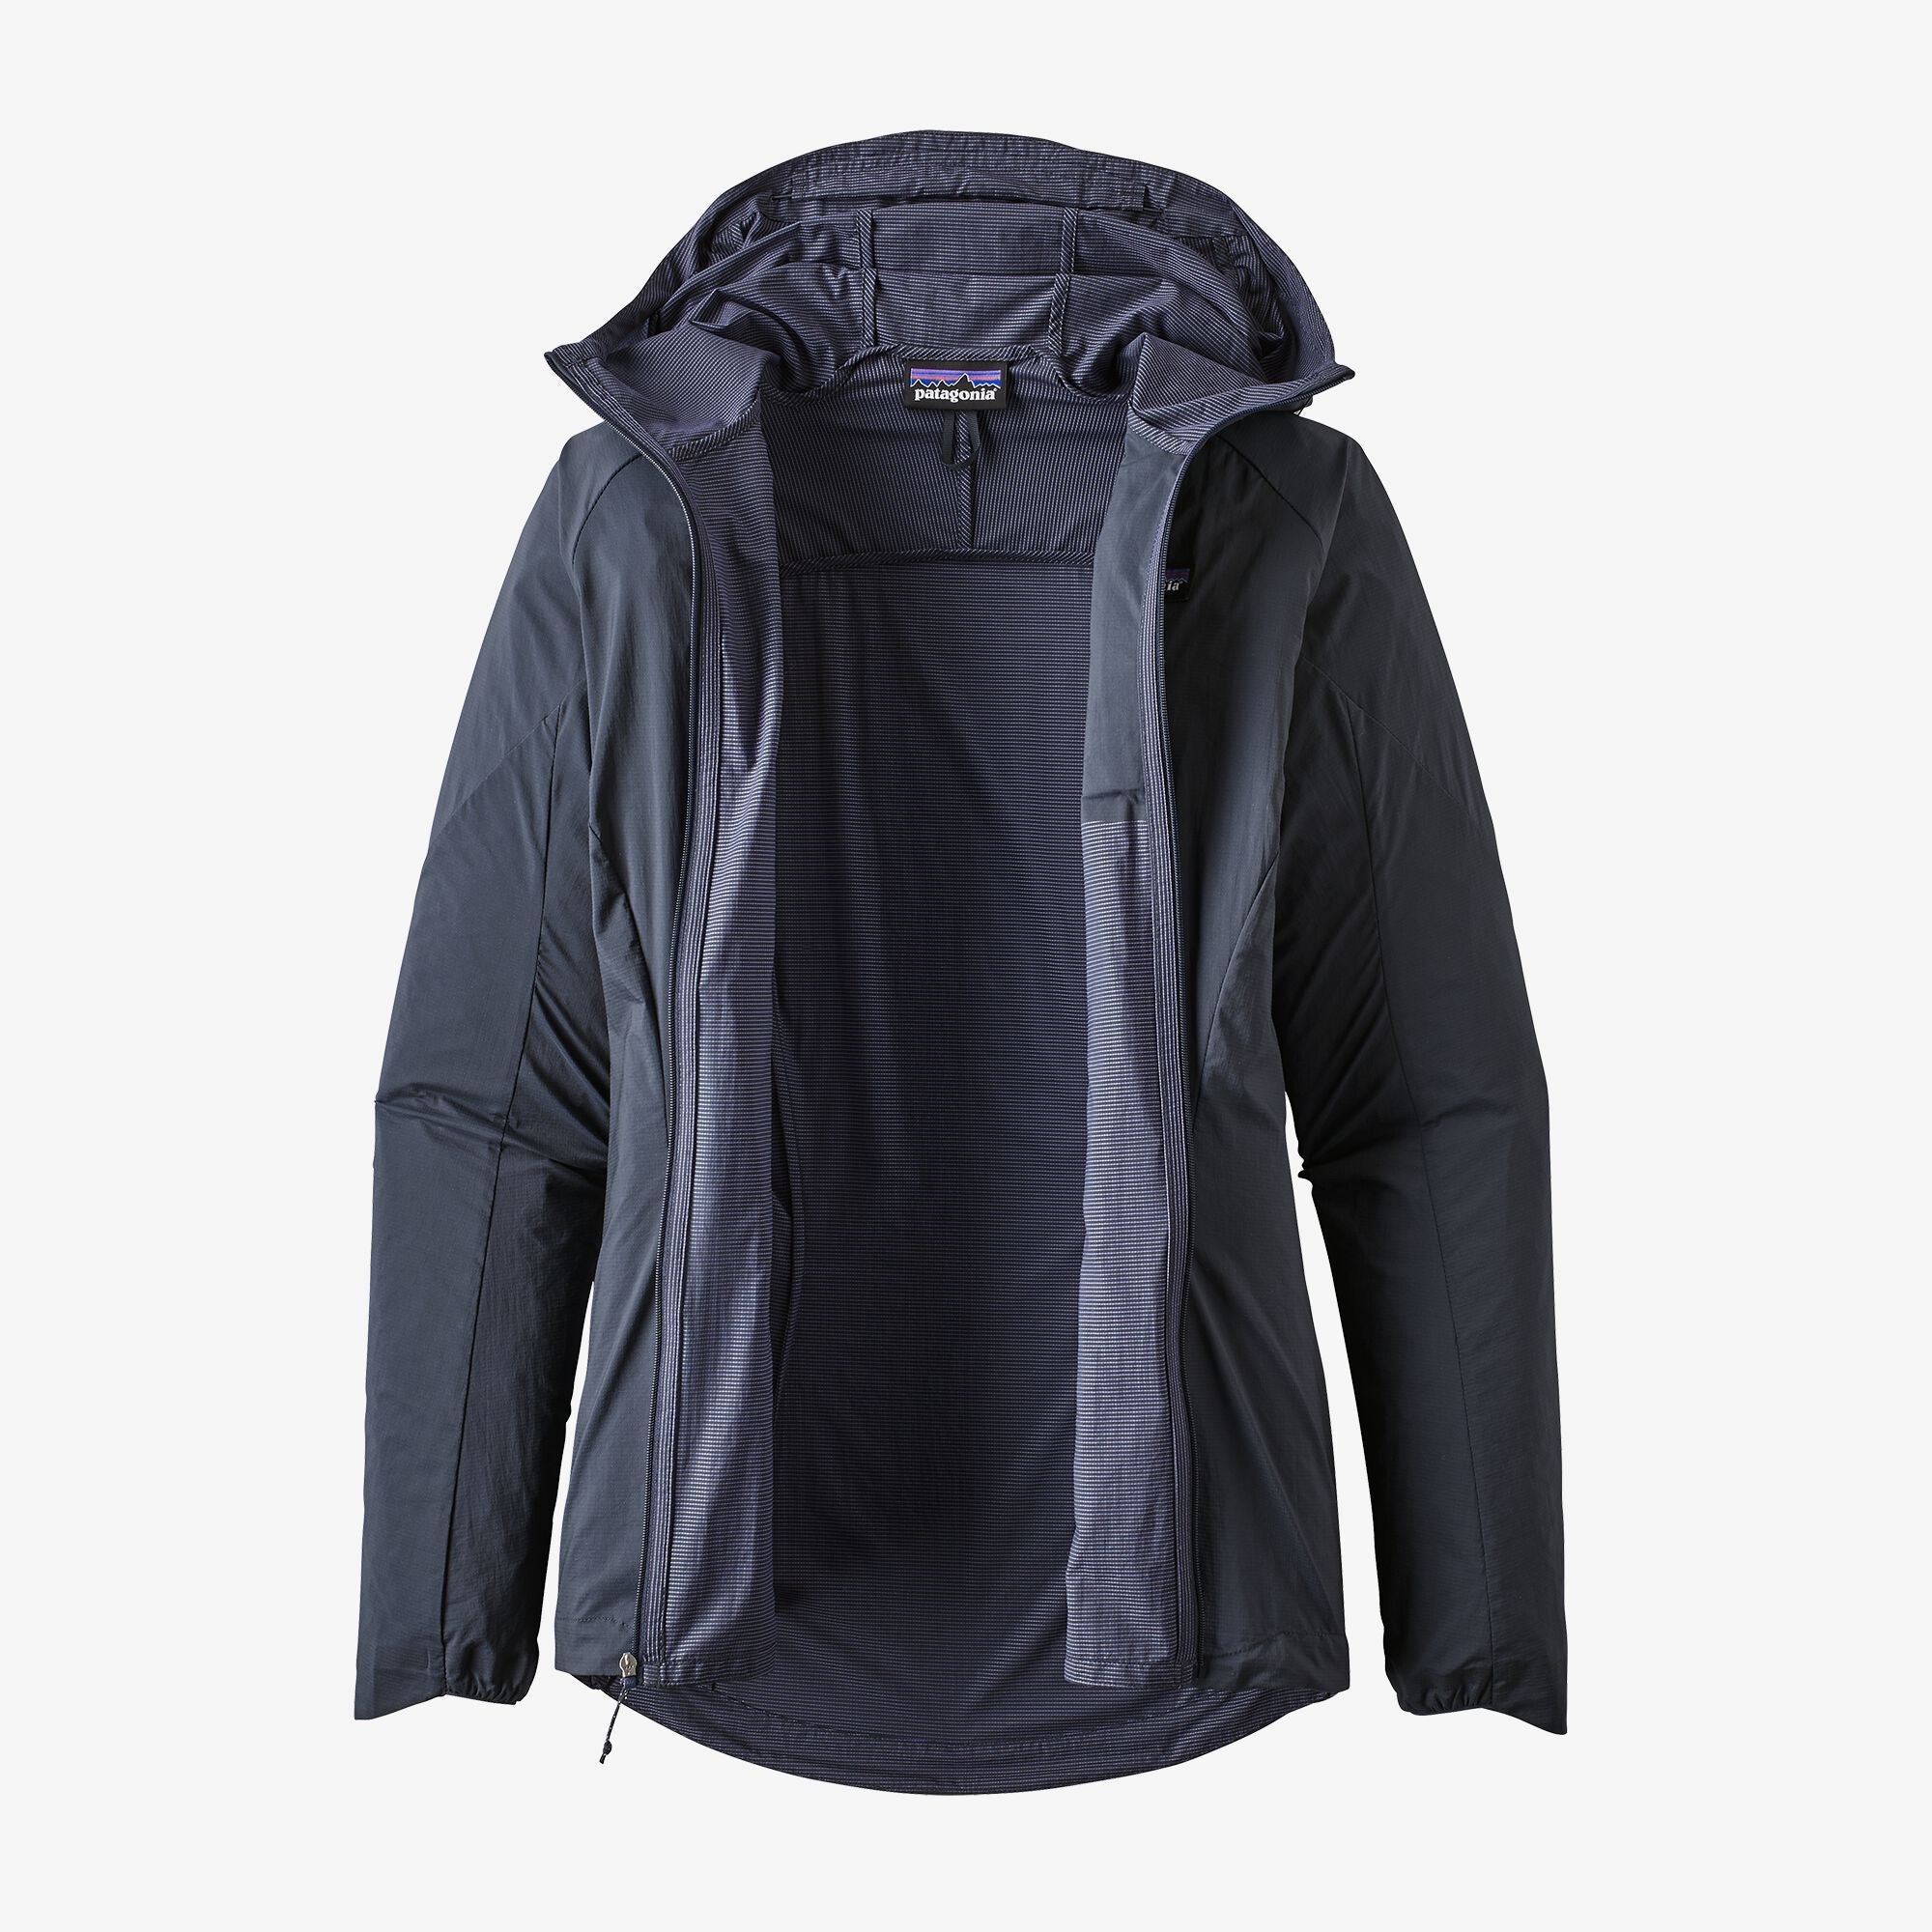 Patagonia Torrentshell 3L Jacket - Women's – The Backpacker